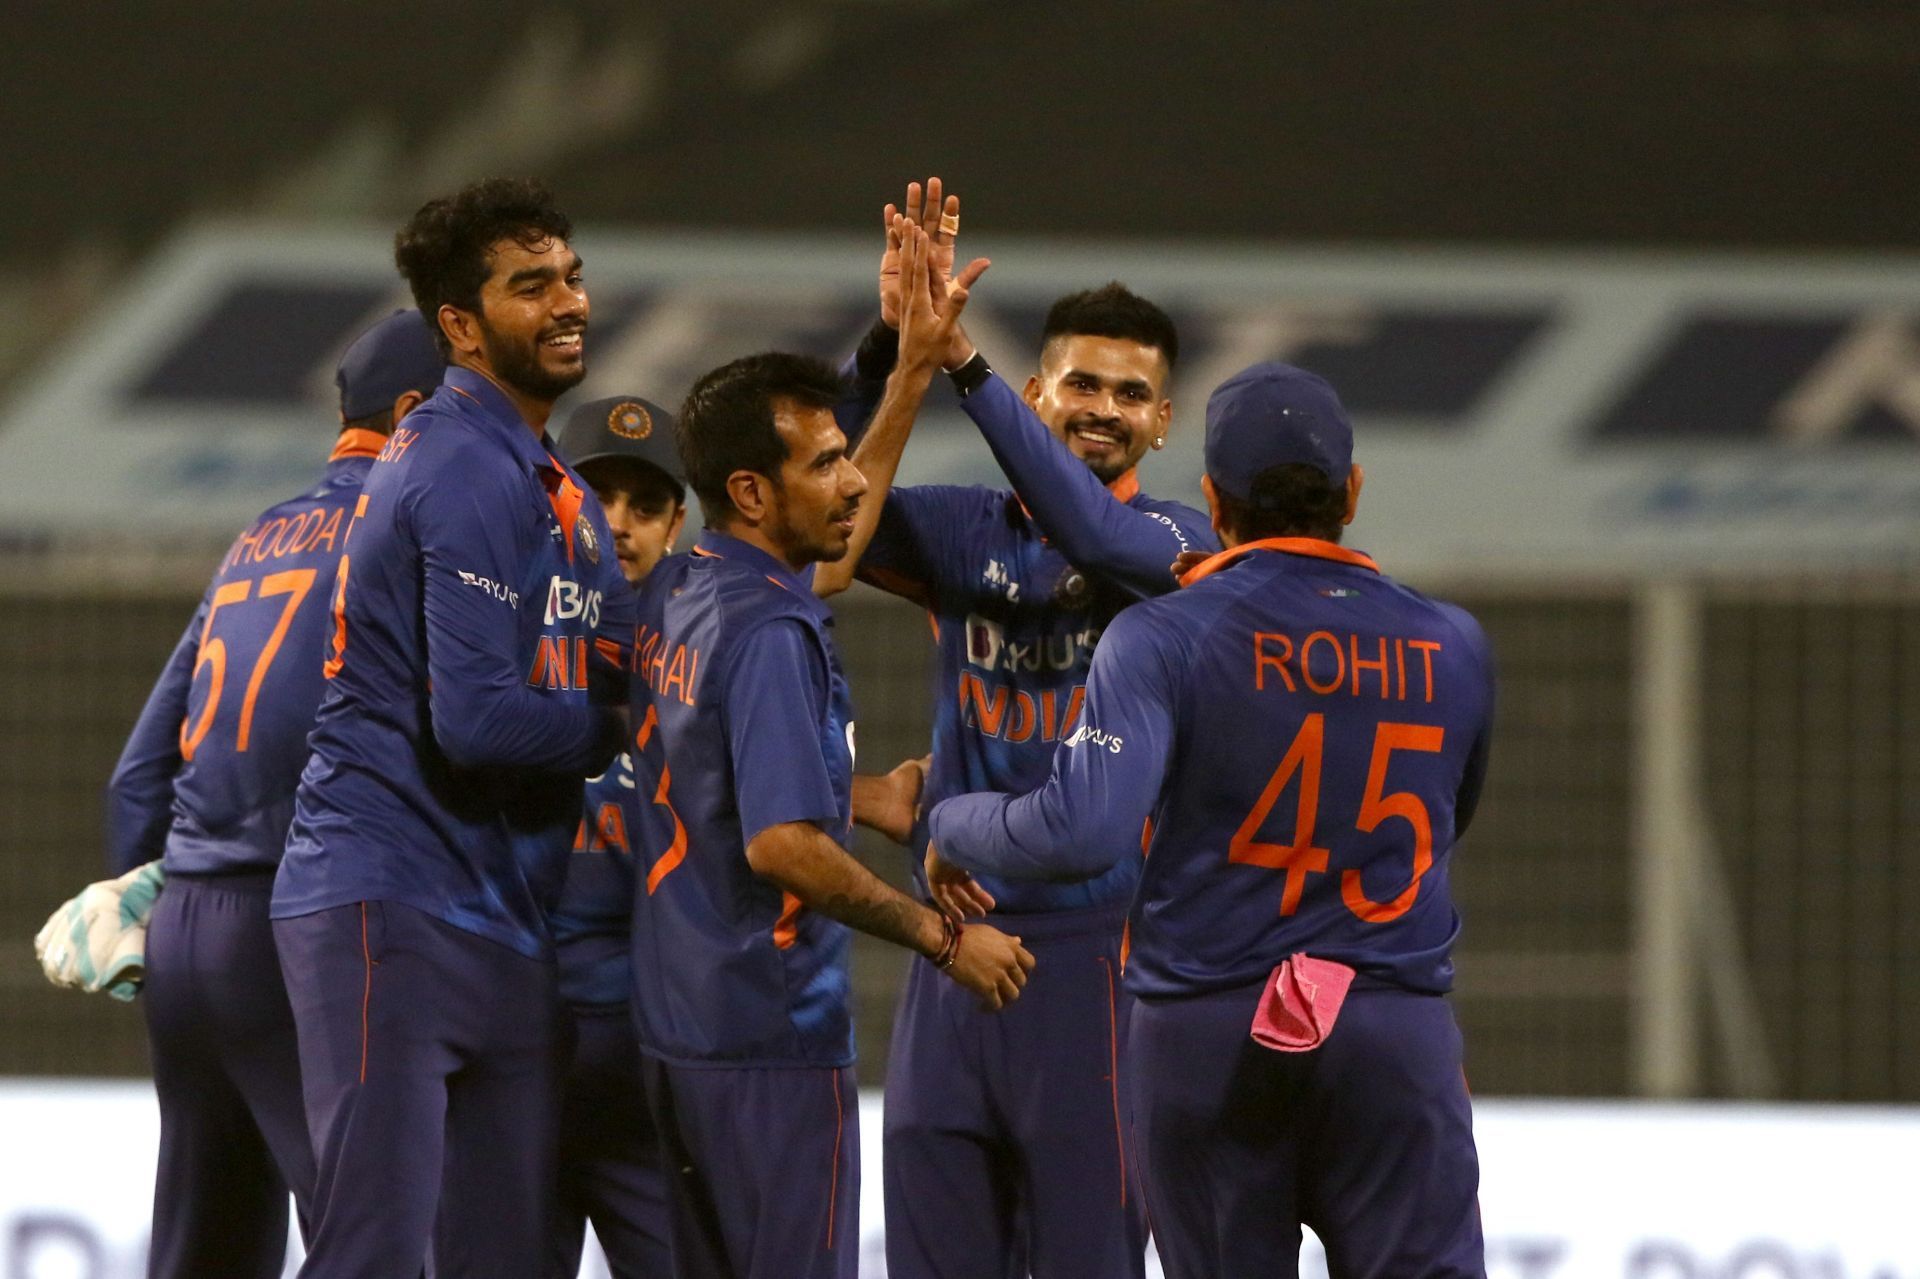 India won the 3rd match and clinched the series 3-0